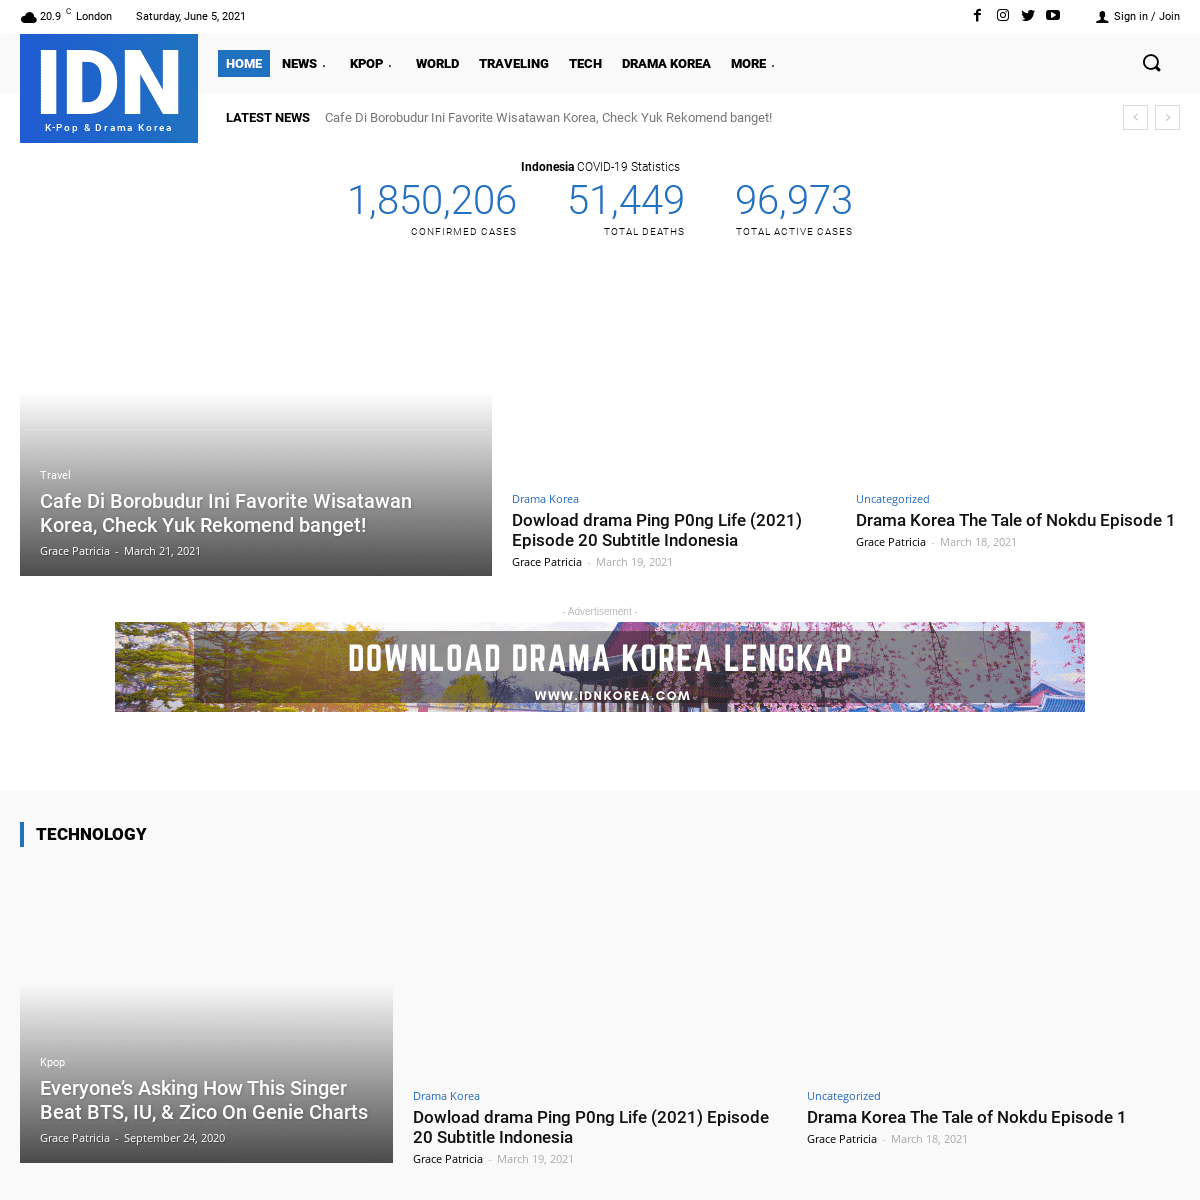 A complete backup of https://idnkpop.com